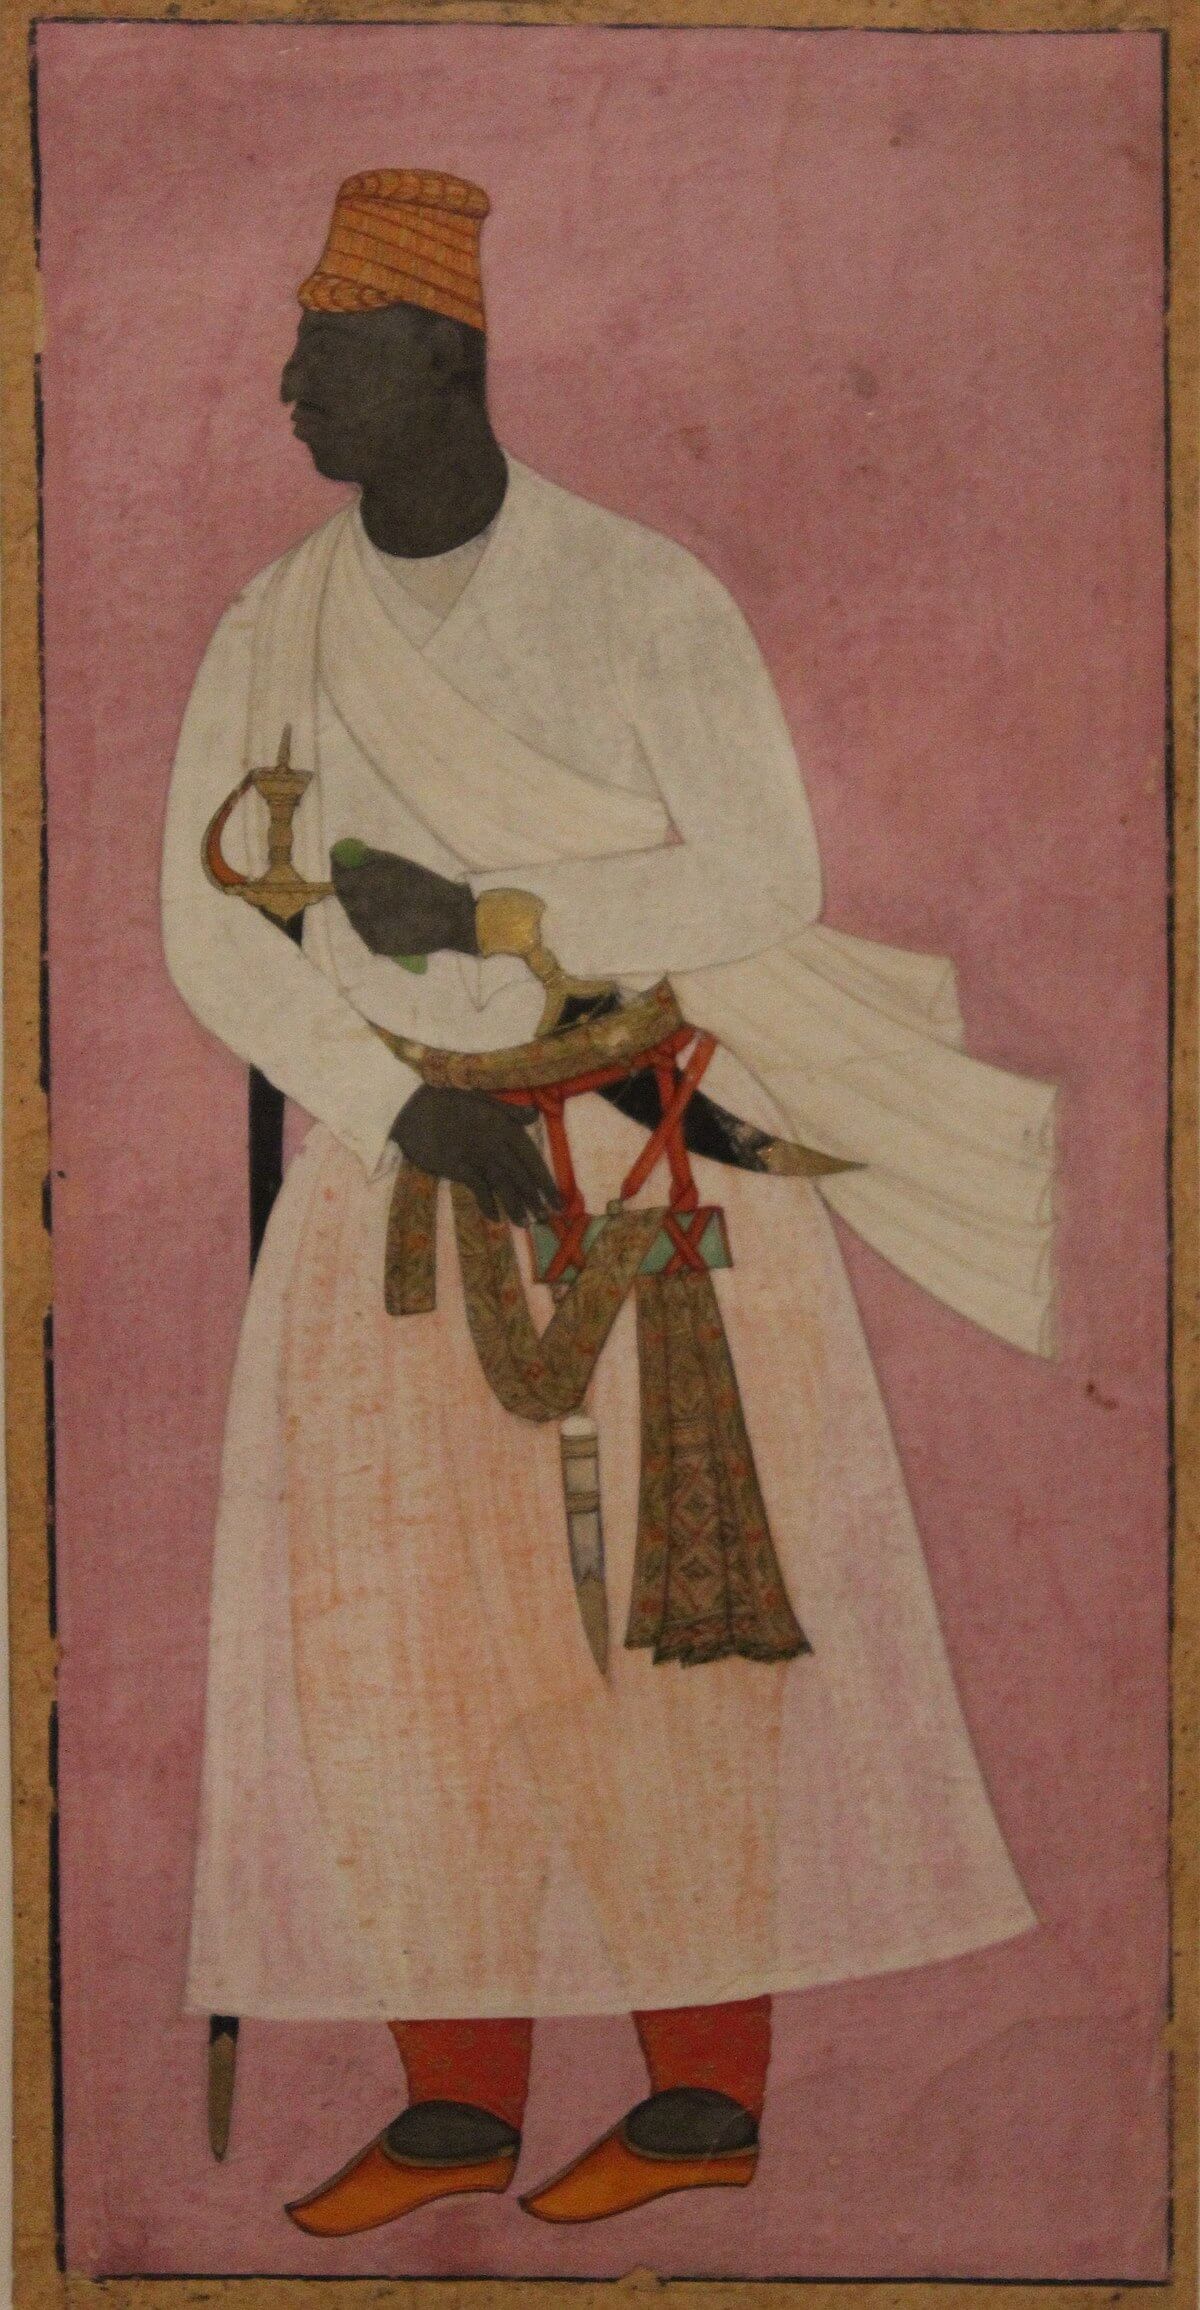 MALIK AMBAR (1548 -1627) - Rebel of Black Fortune and Founder of the City of Khadki - African Leaders Magazine 